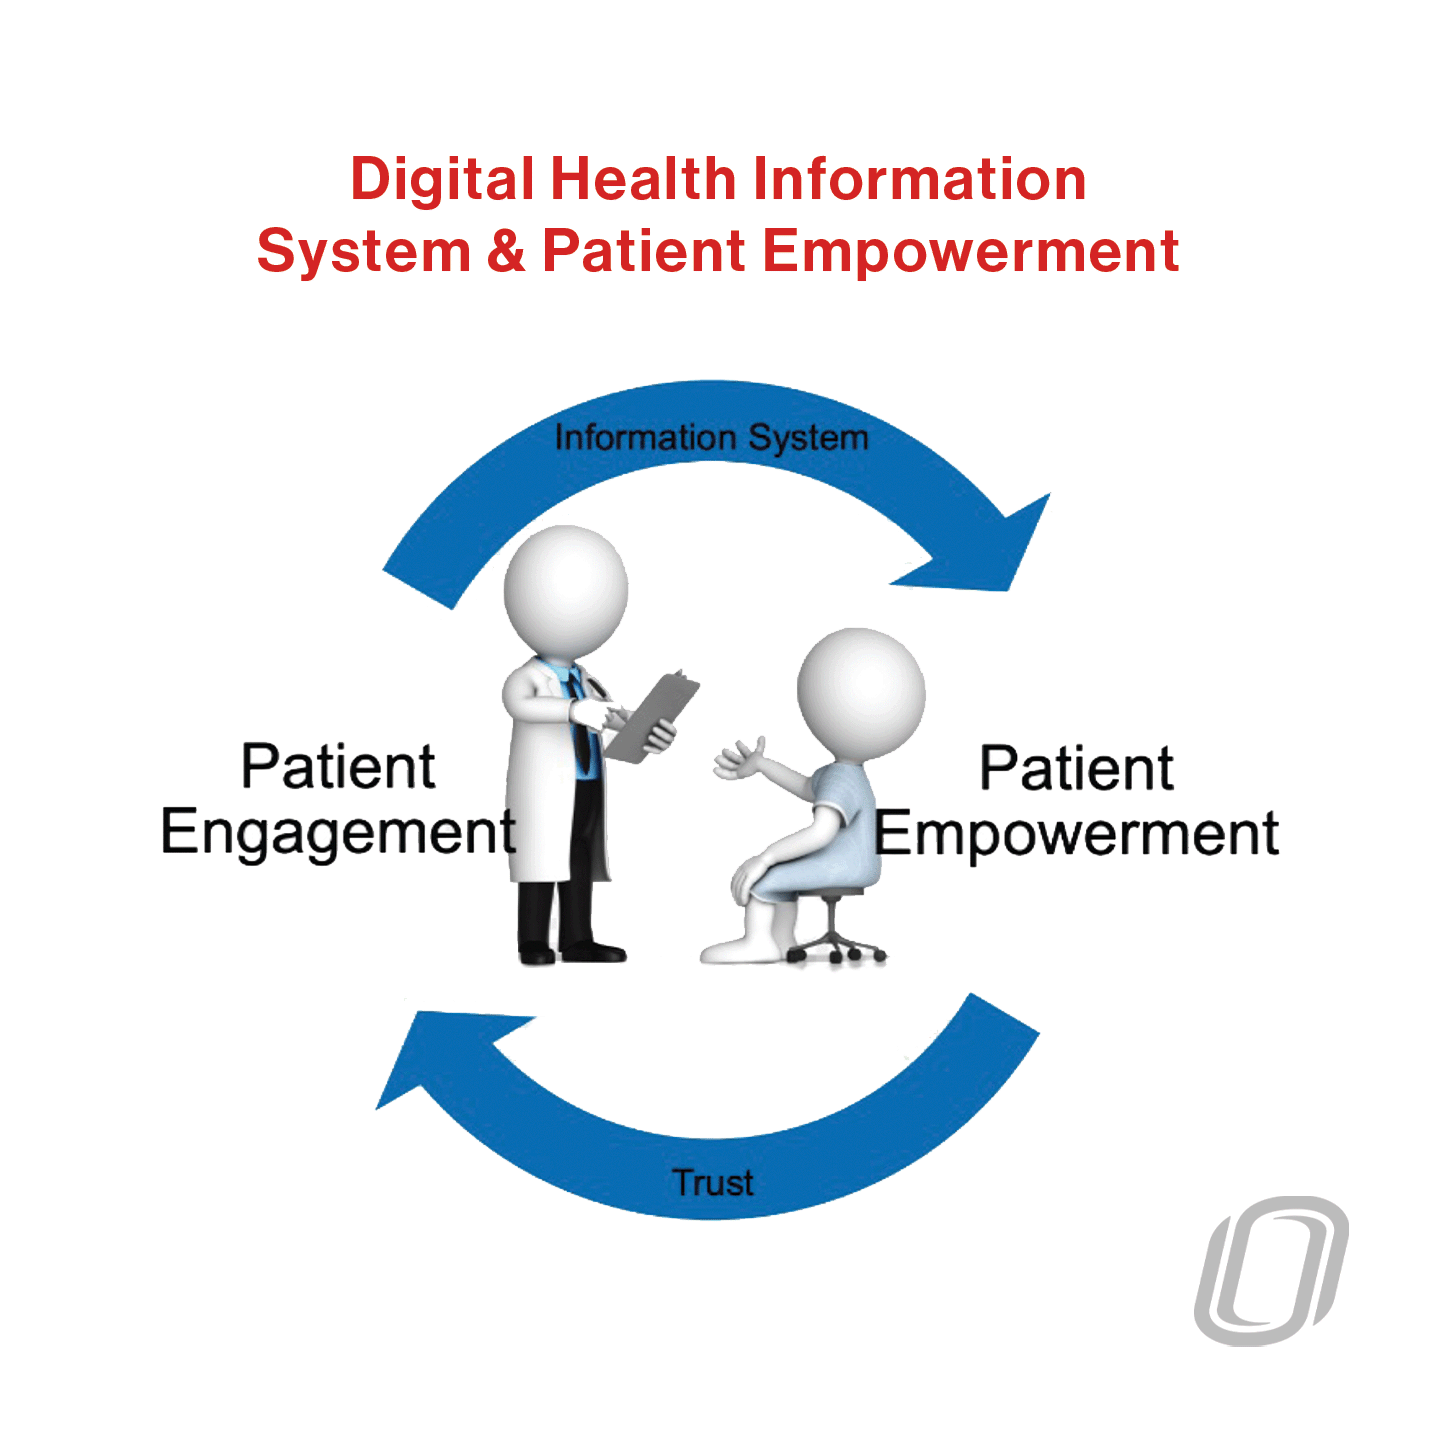 a graphic depicting the information system/trust cycle in a digital health information system